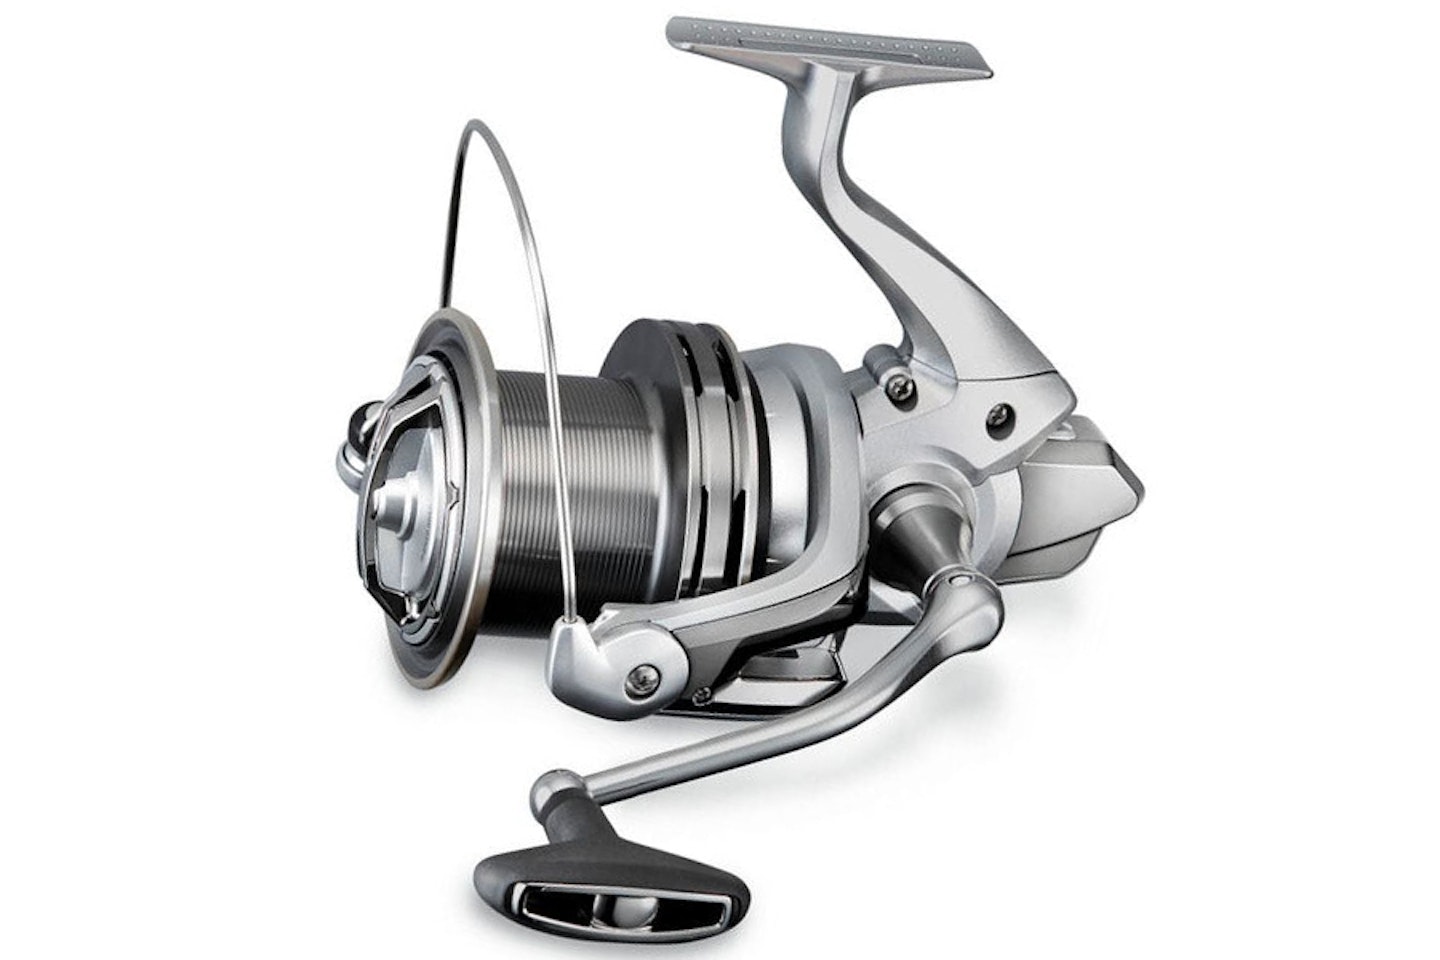 Shimano Reels - UK Best Fishing Reels for Anglers at Lure Box